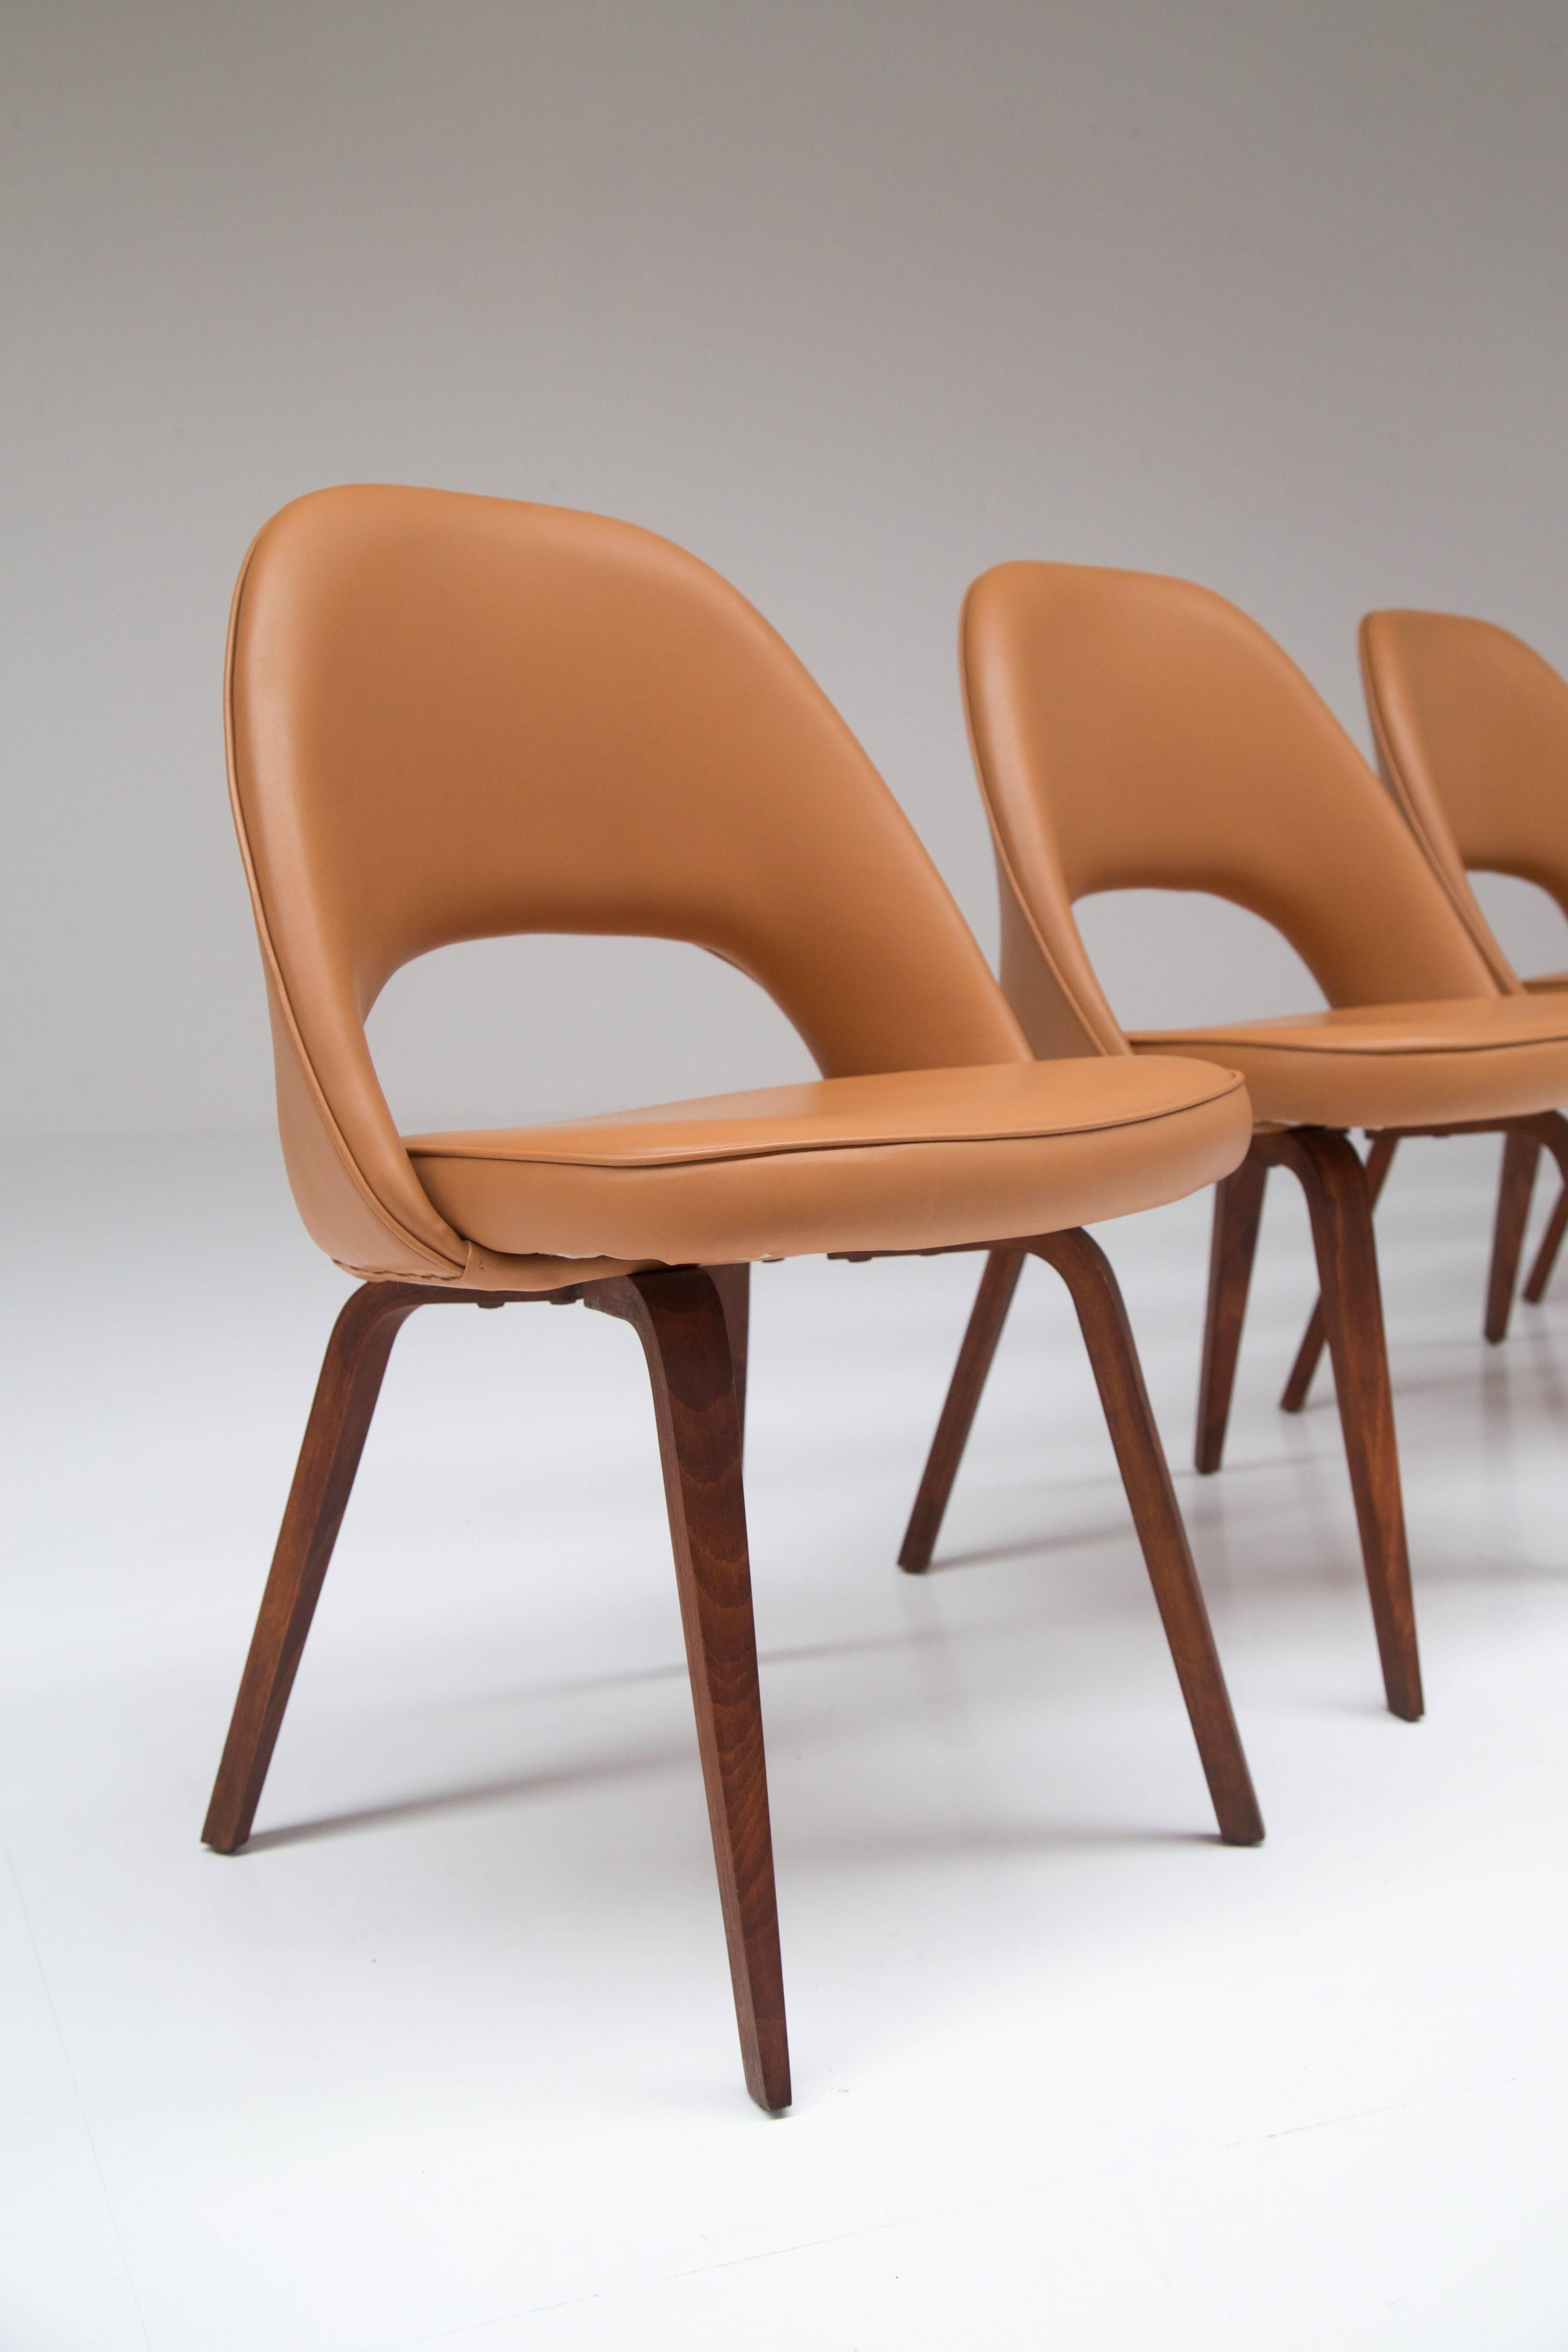 Large set of 18 conference chairs by Eero Saarinen for Knoll International.
The chairs come from a conference room of a bank in France. They are all in fantastic original condition. This is the version with legs in wood and original leatherette